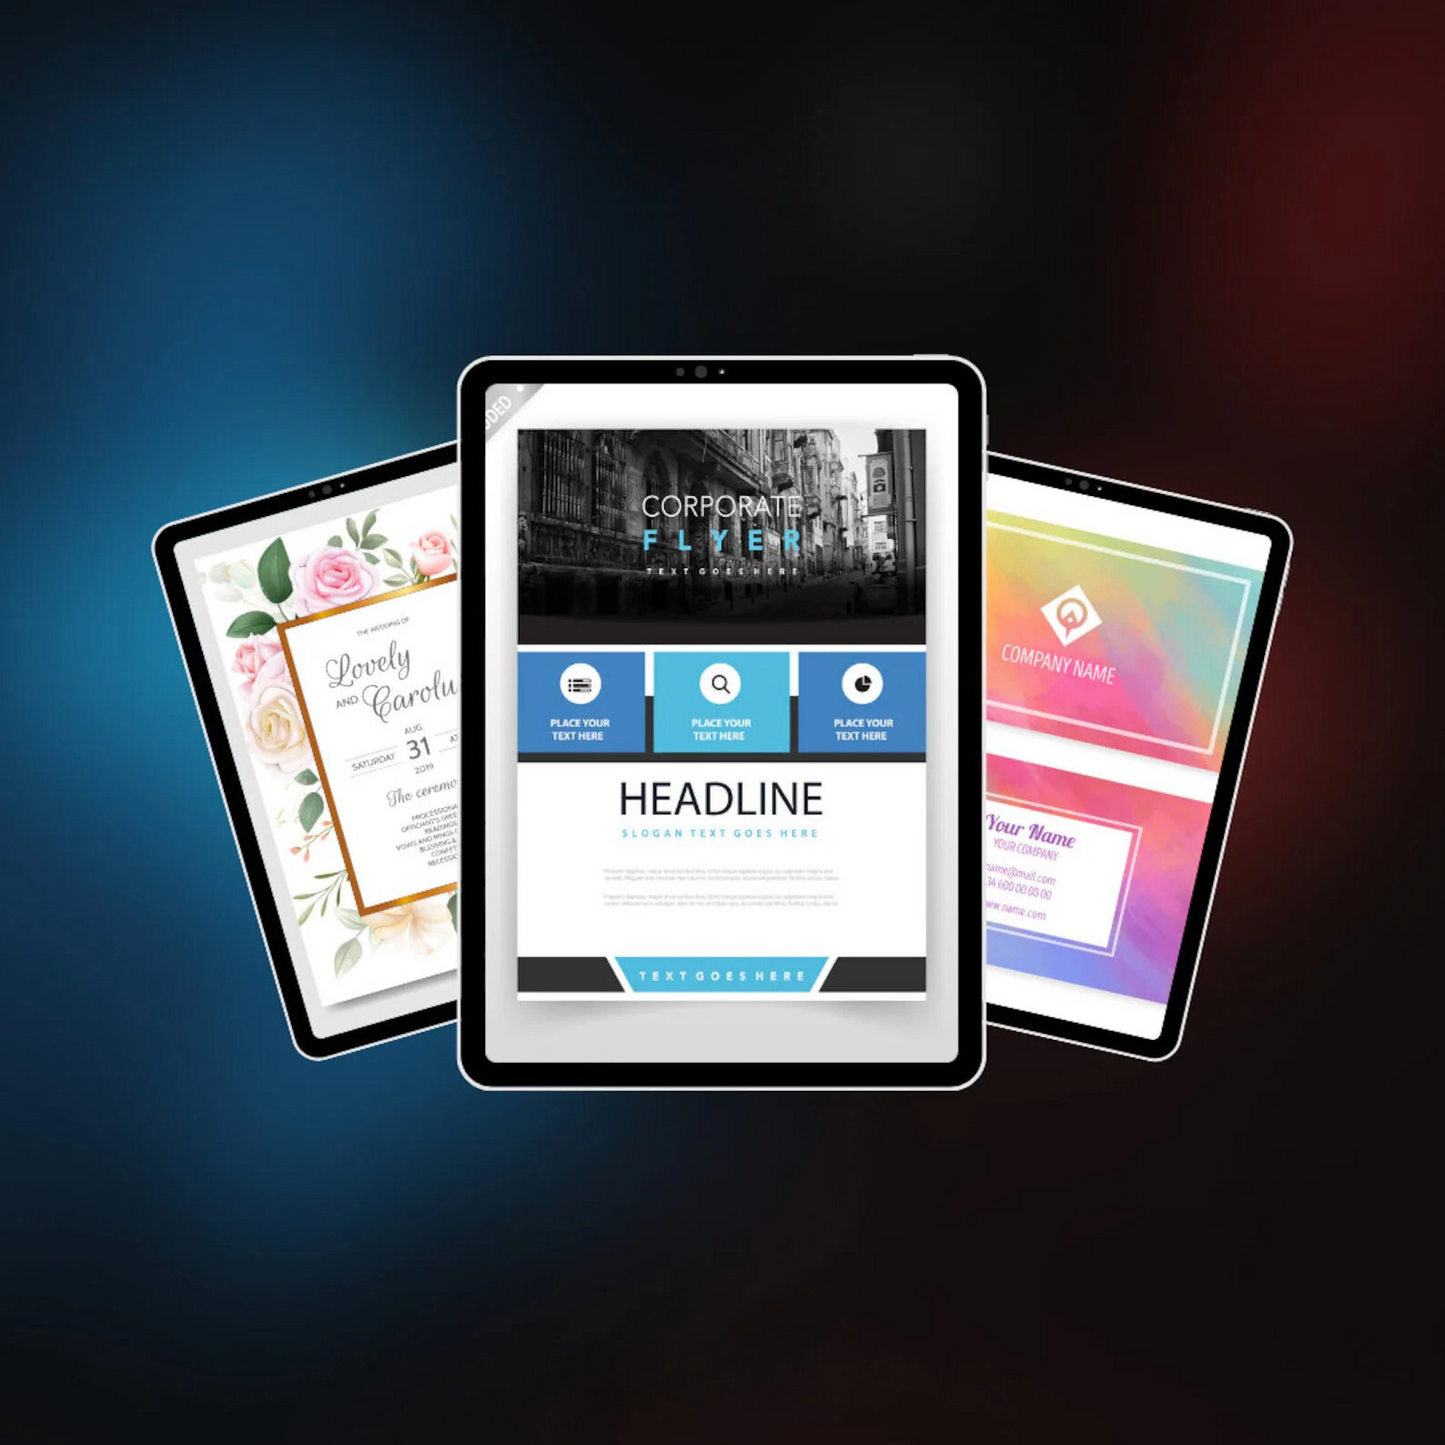 7,200+ Brochures, business cards & flyers templates